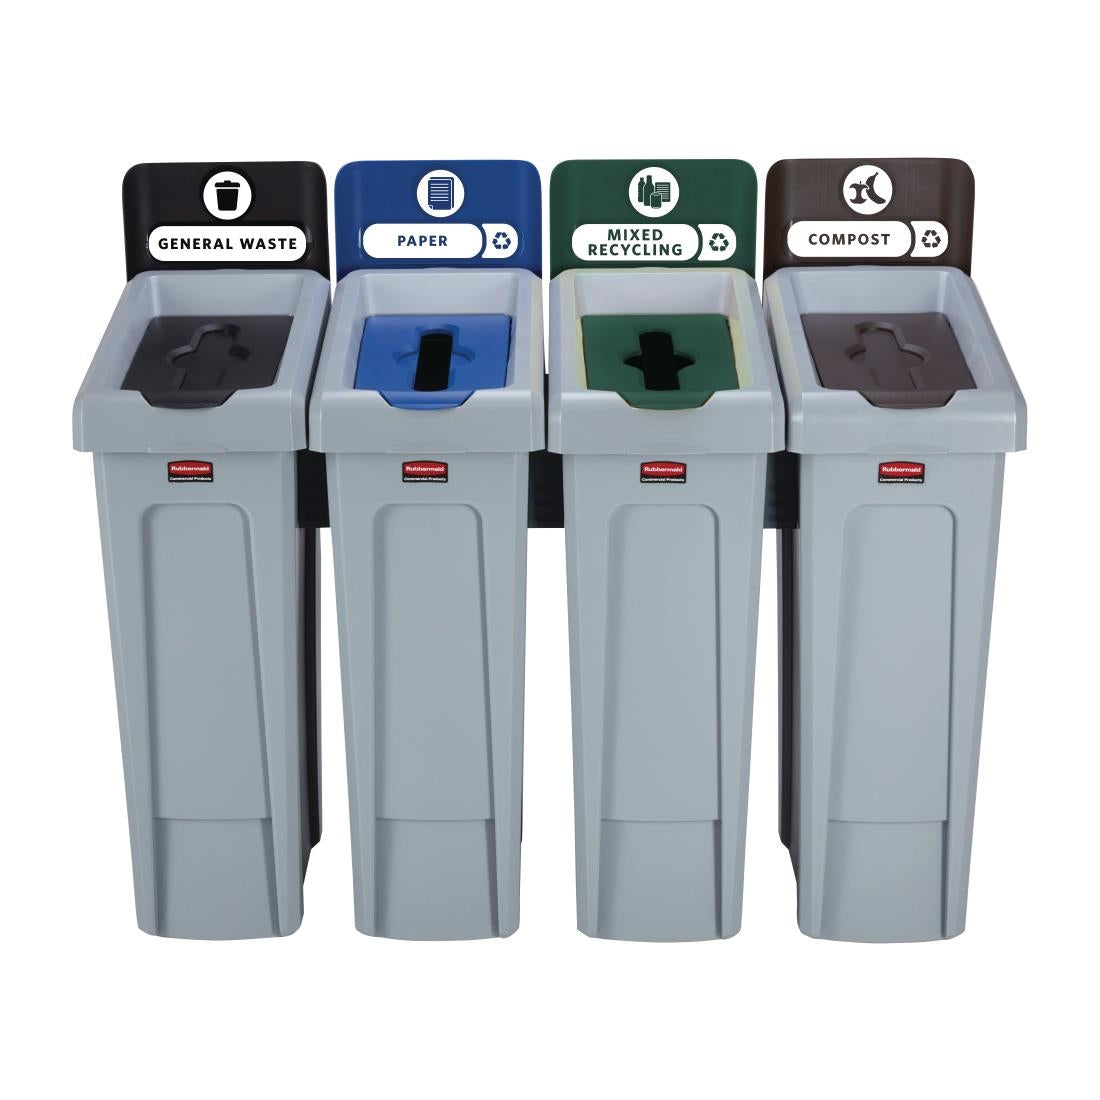 DY081 Rubbermaid Slim Jim Four Stream Recycling Station 87Ltr